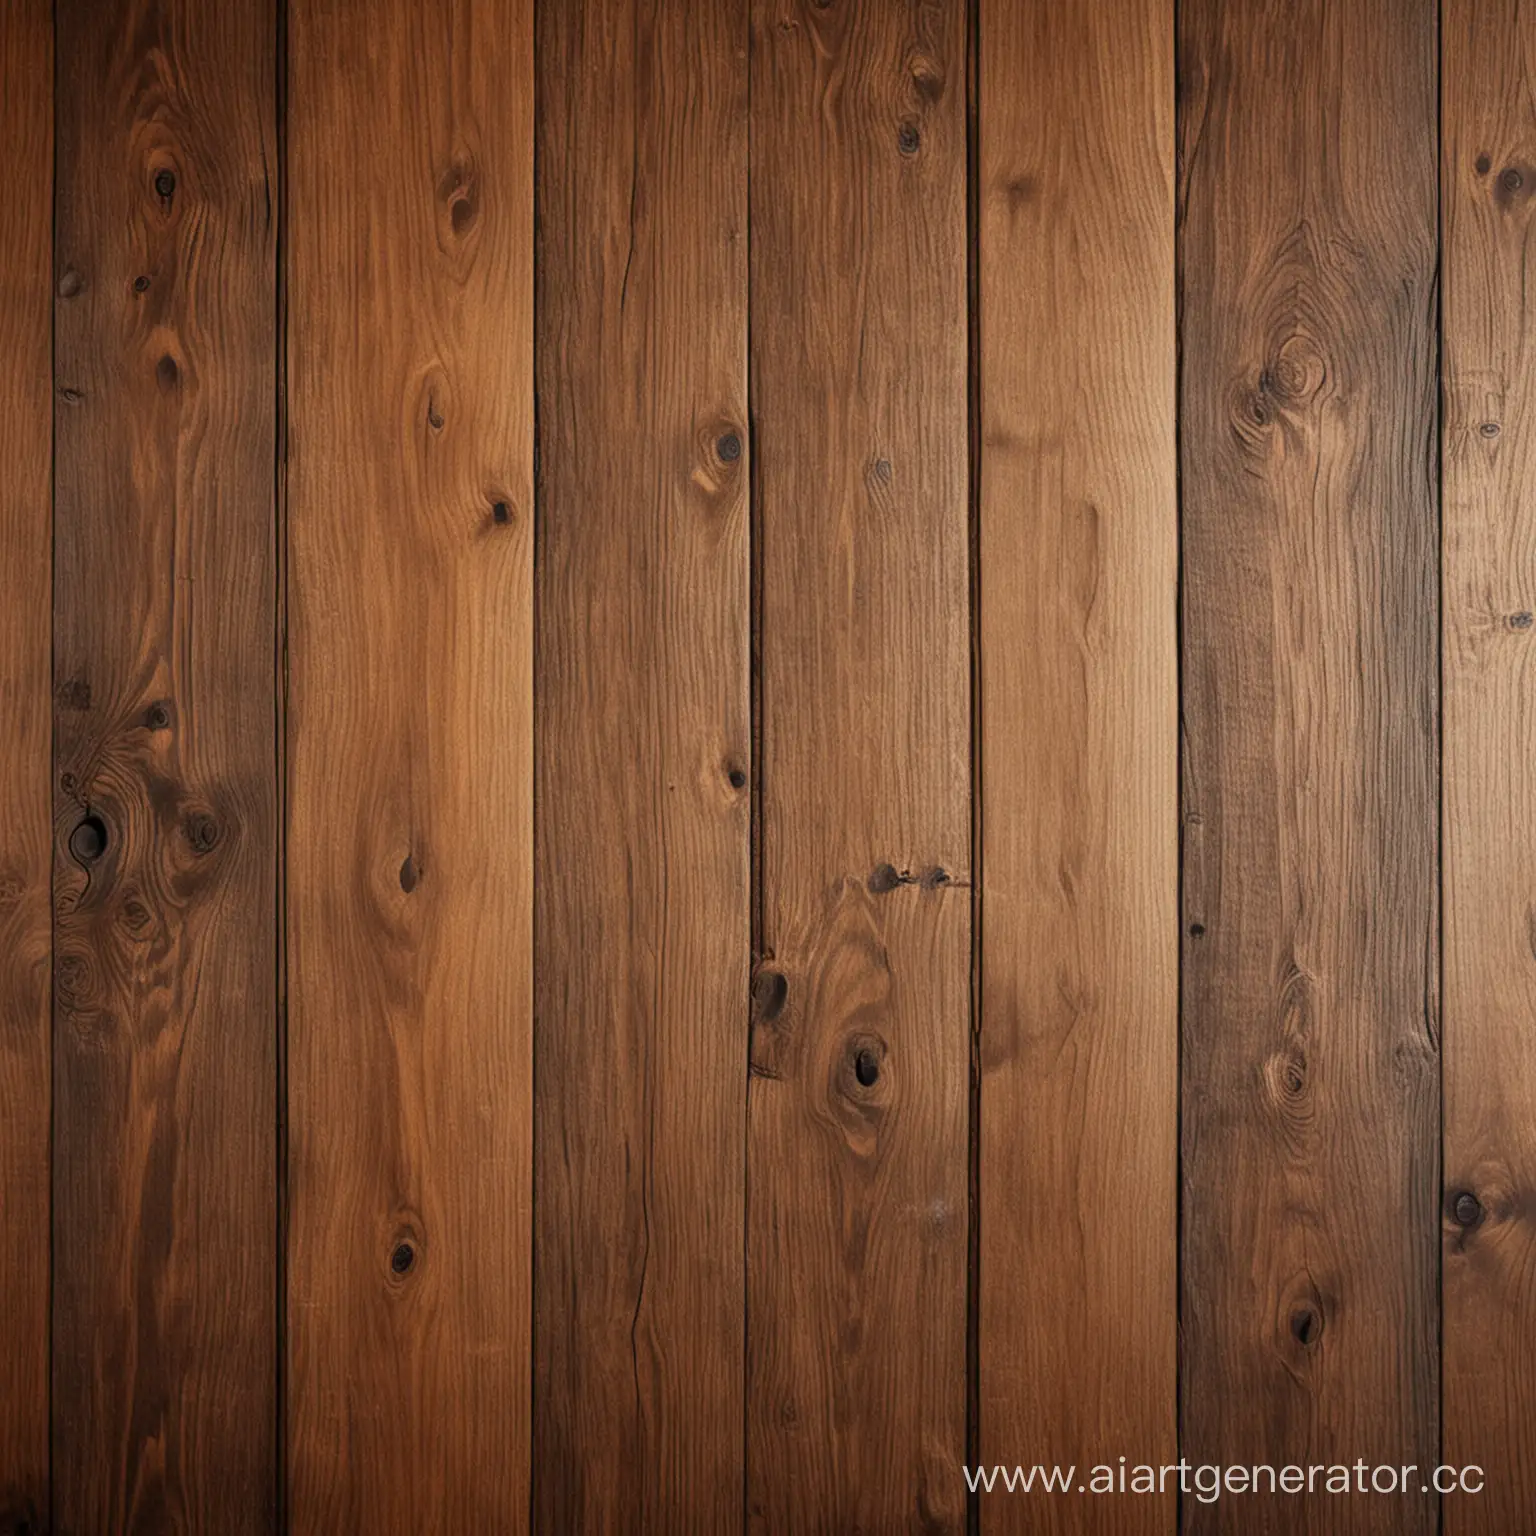 wooden boards background